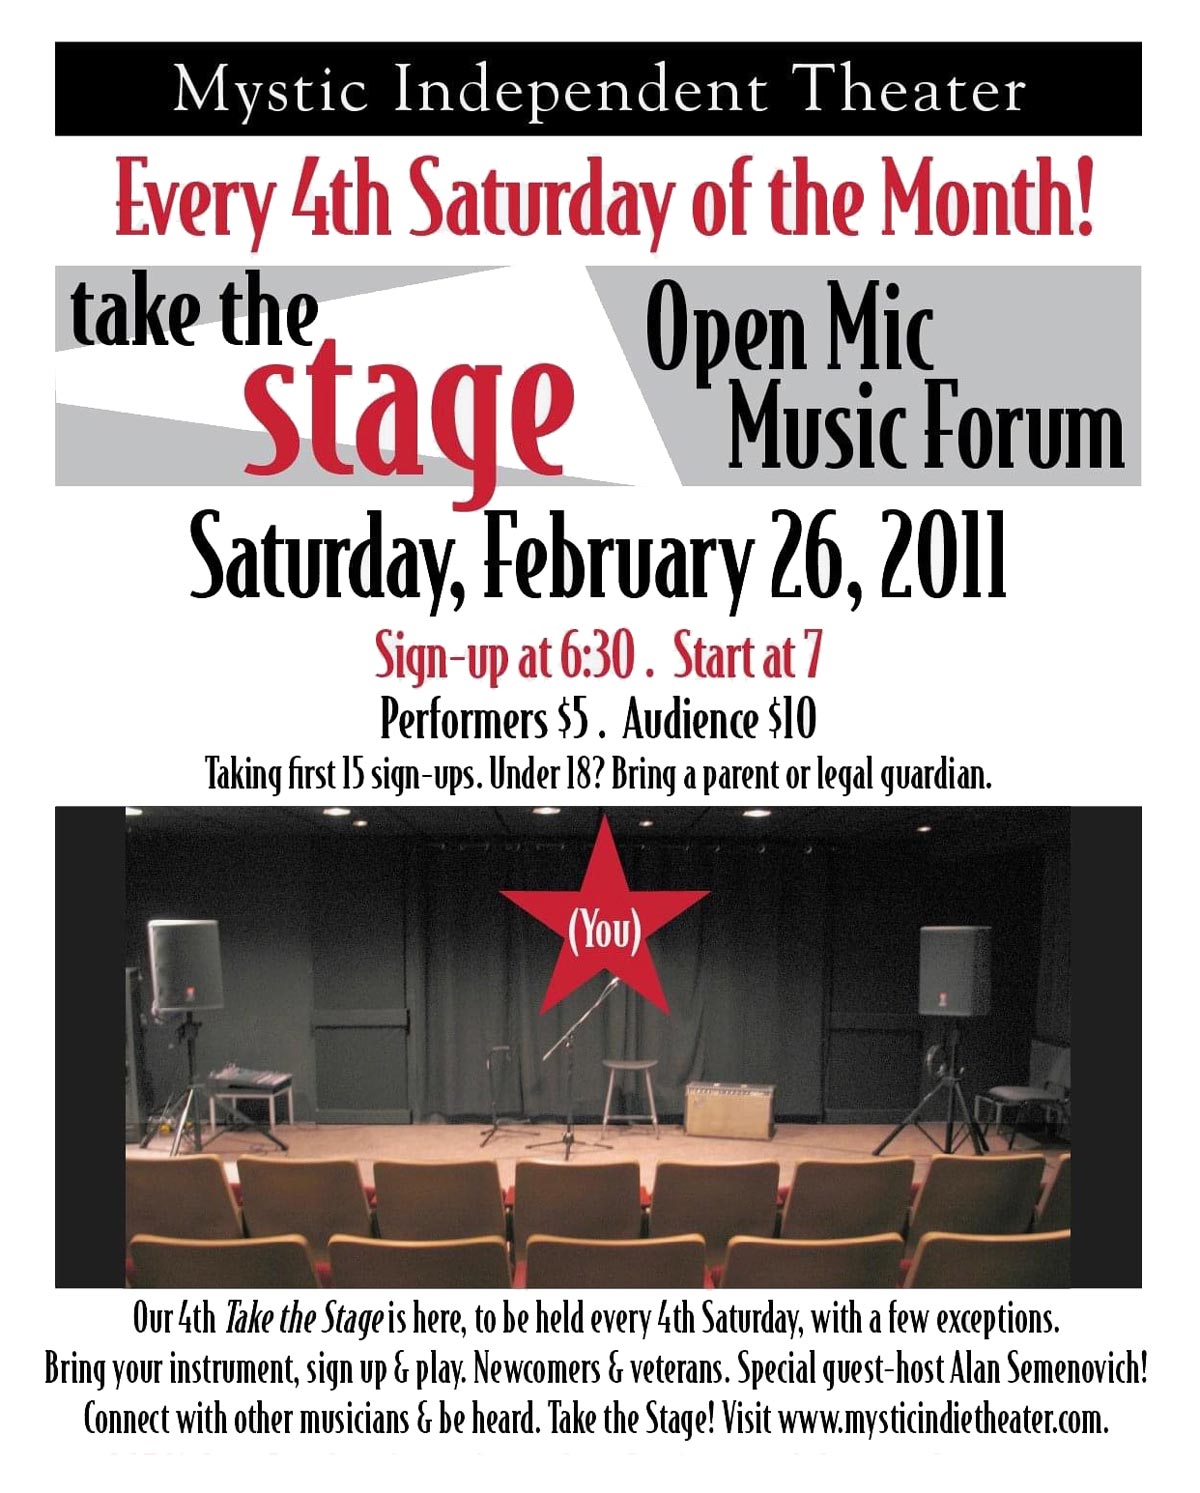 Casey Cyr Gash founded the Take The Stage Open Mic Music Forum event at <em>Mystic Independent Theater, to make a cool space for songwriters to share their craft - Special thanks to Songwriter Alan Semenovich